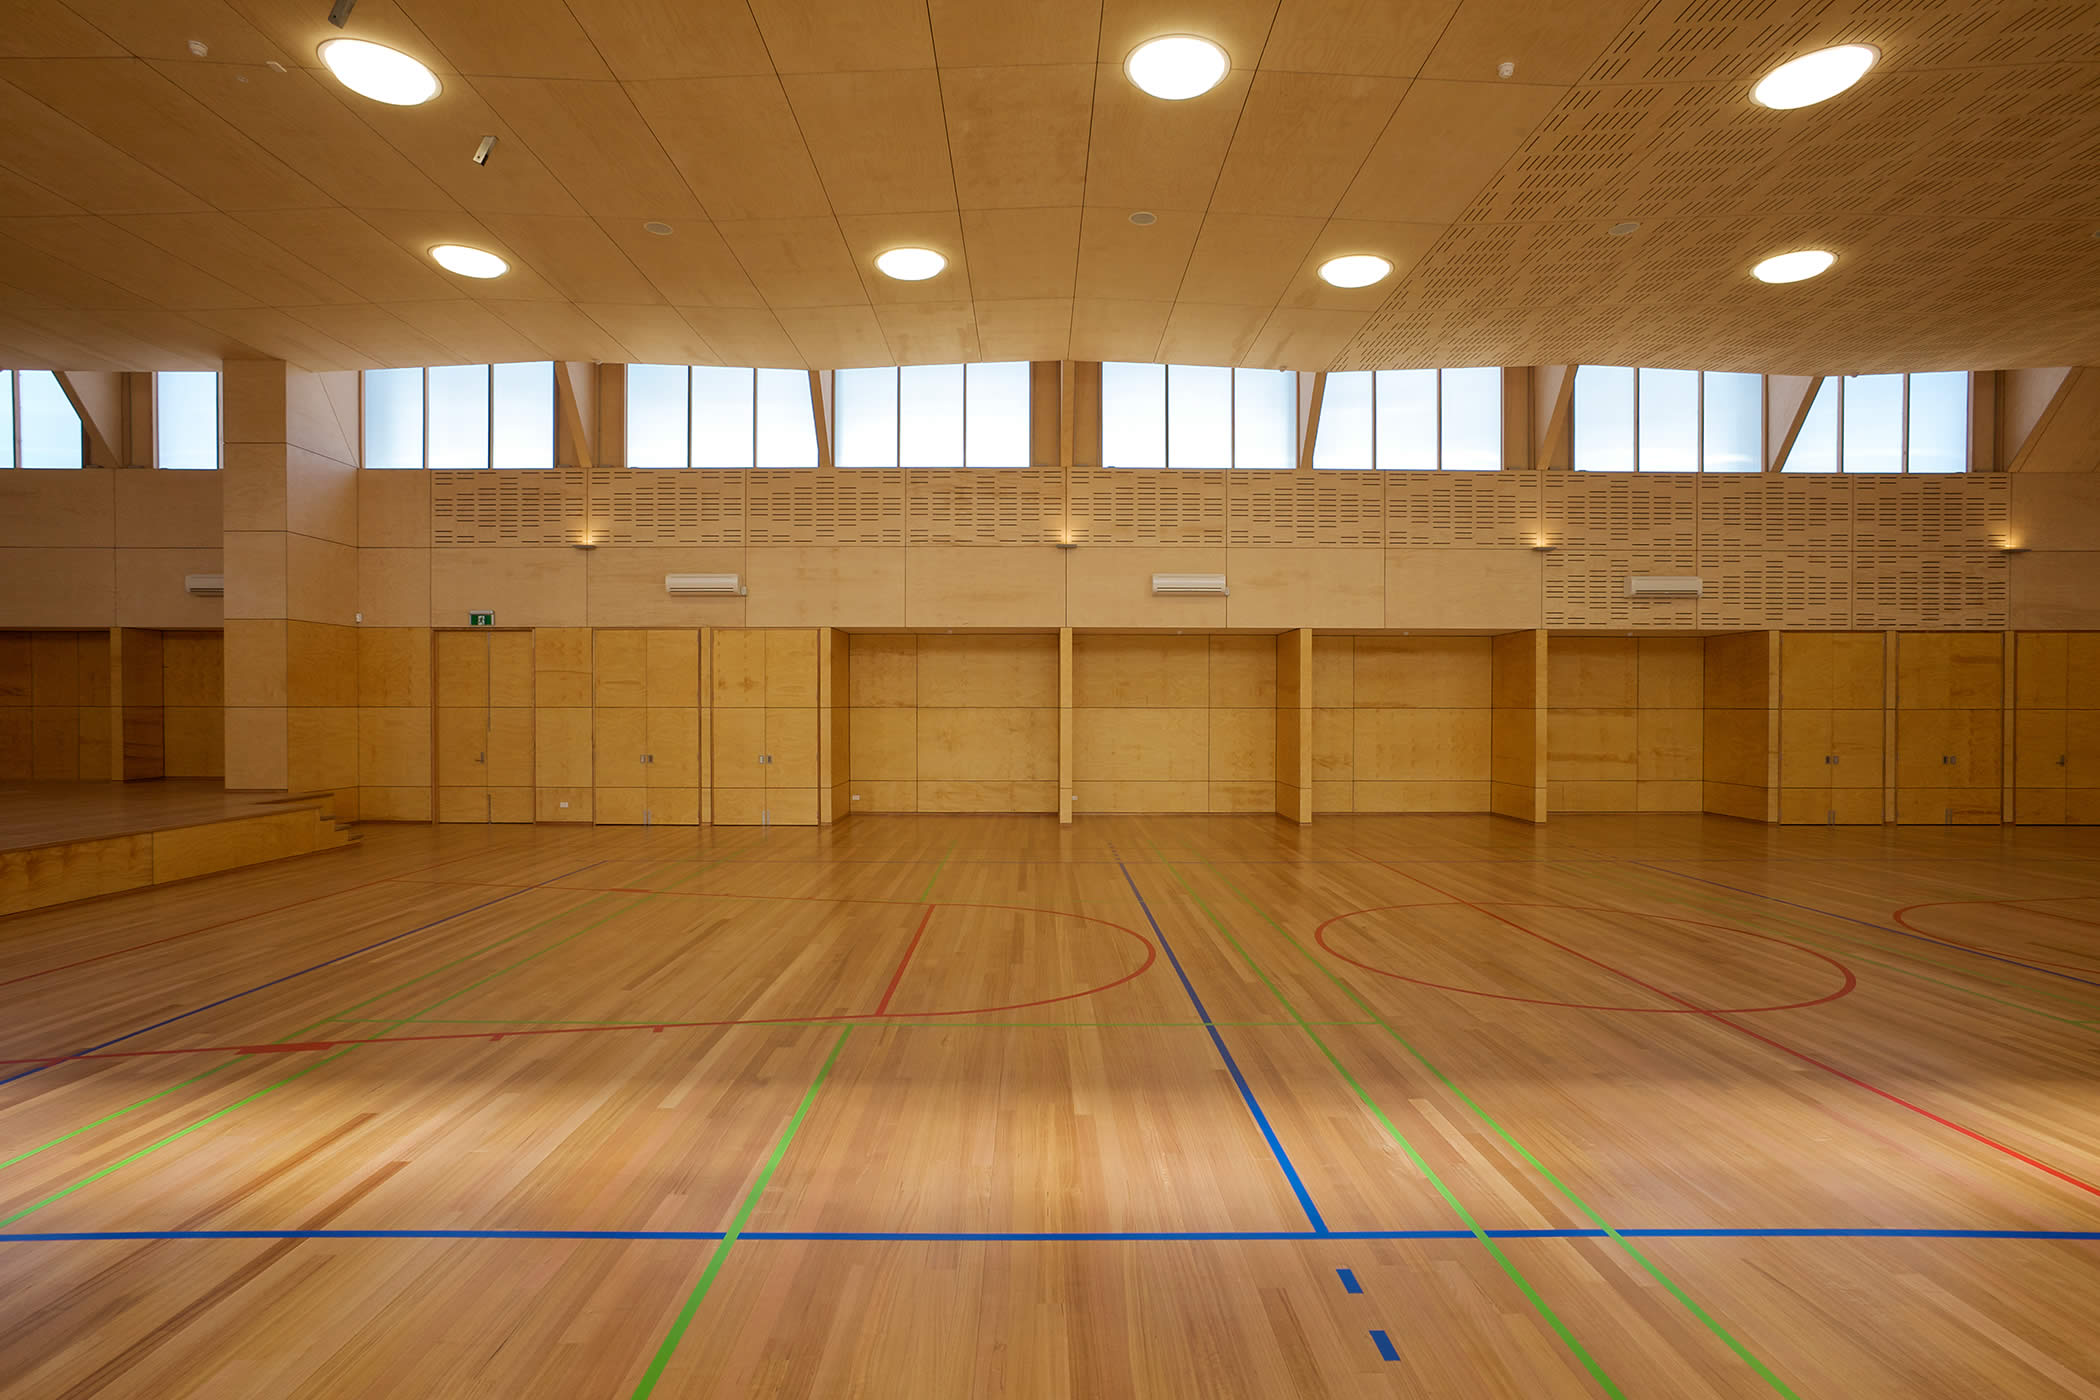 Tarremah School Hall, Kingston, Tasmania: The acoustically engineered ceiling is a subtle sculptural element, acoustic panel perforations a decorative pattern, and plywood lining meets client requirements for natural materials.  Photo by Ray Joyce.